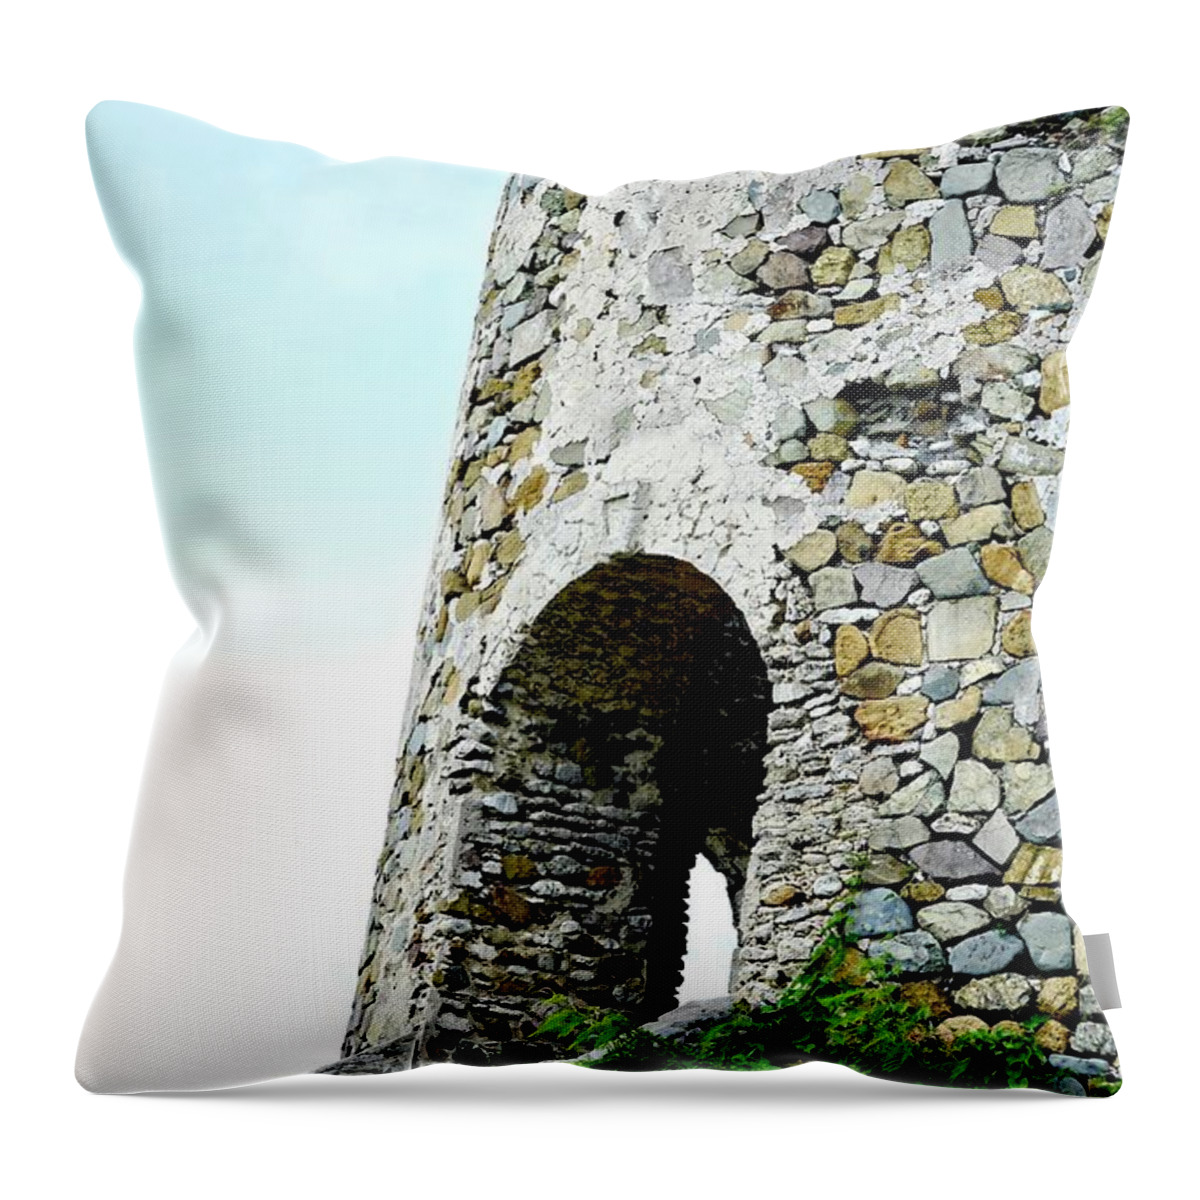 Sugar Throw Pillow featuring the photograph Island Suger Mill by Amy McDaniel